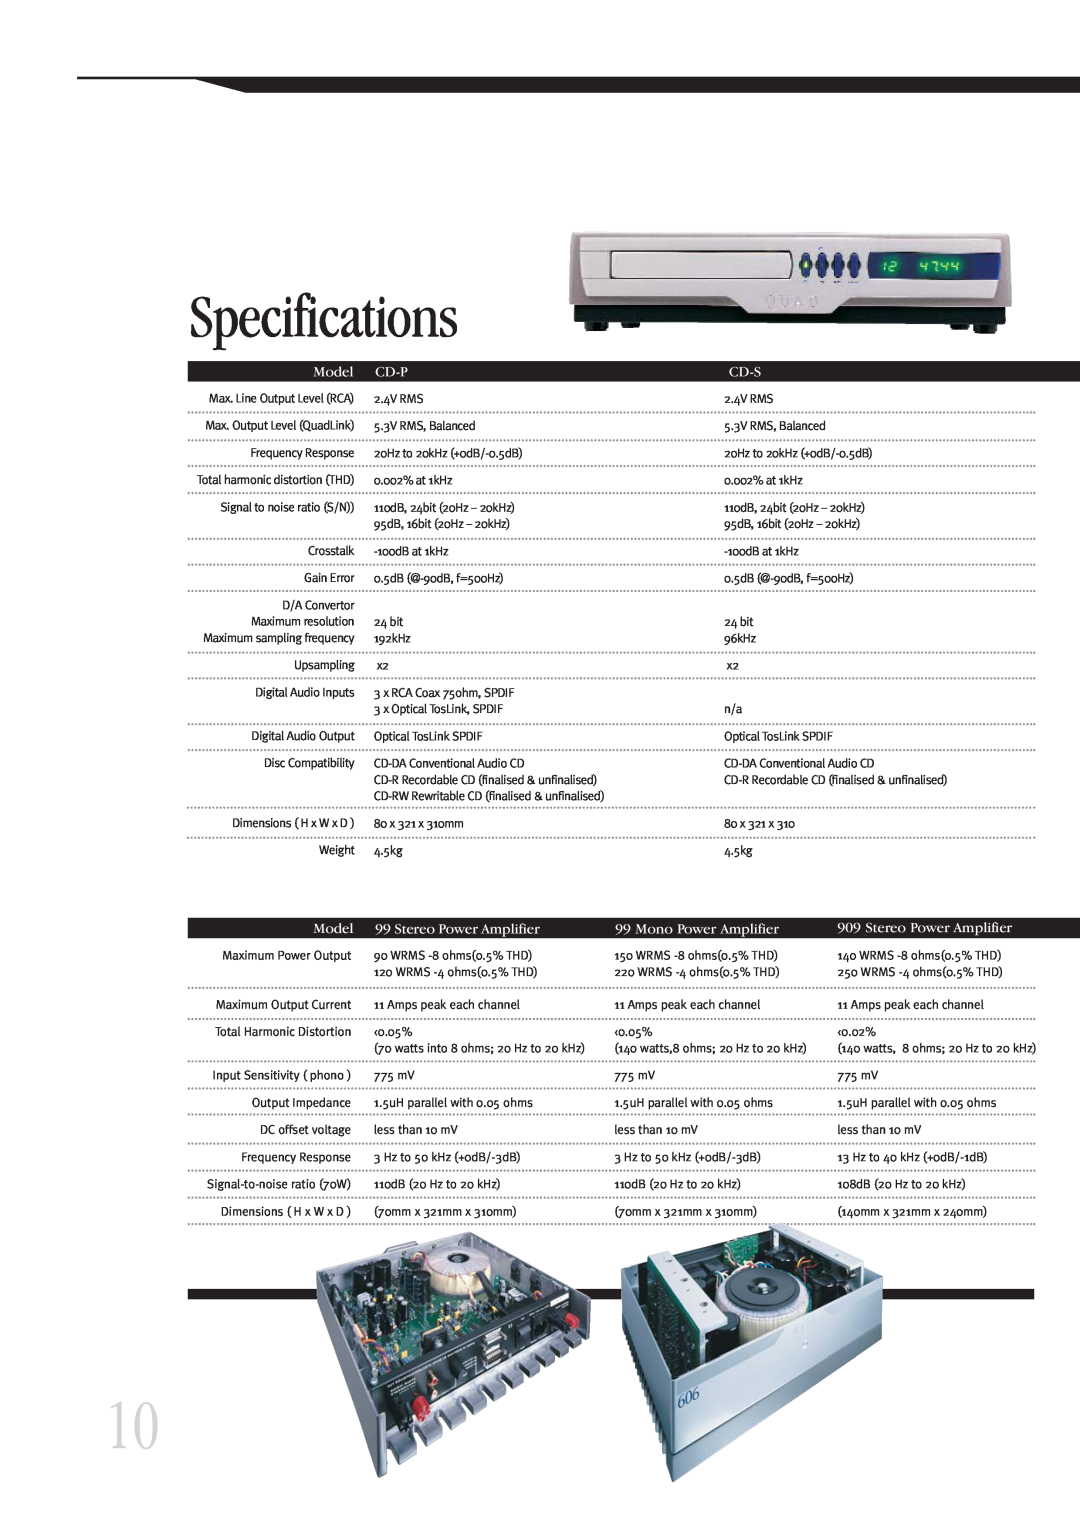 QUAD 99 Series manual Specifications, Model, Cd-P, Cd-S, Stereo Power Amplifier, Mono Power Amplifier 